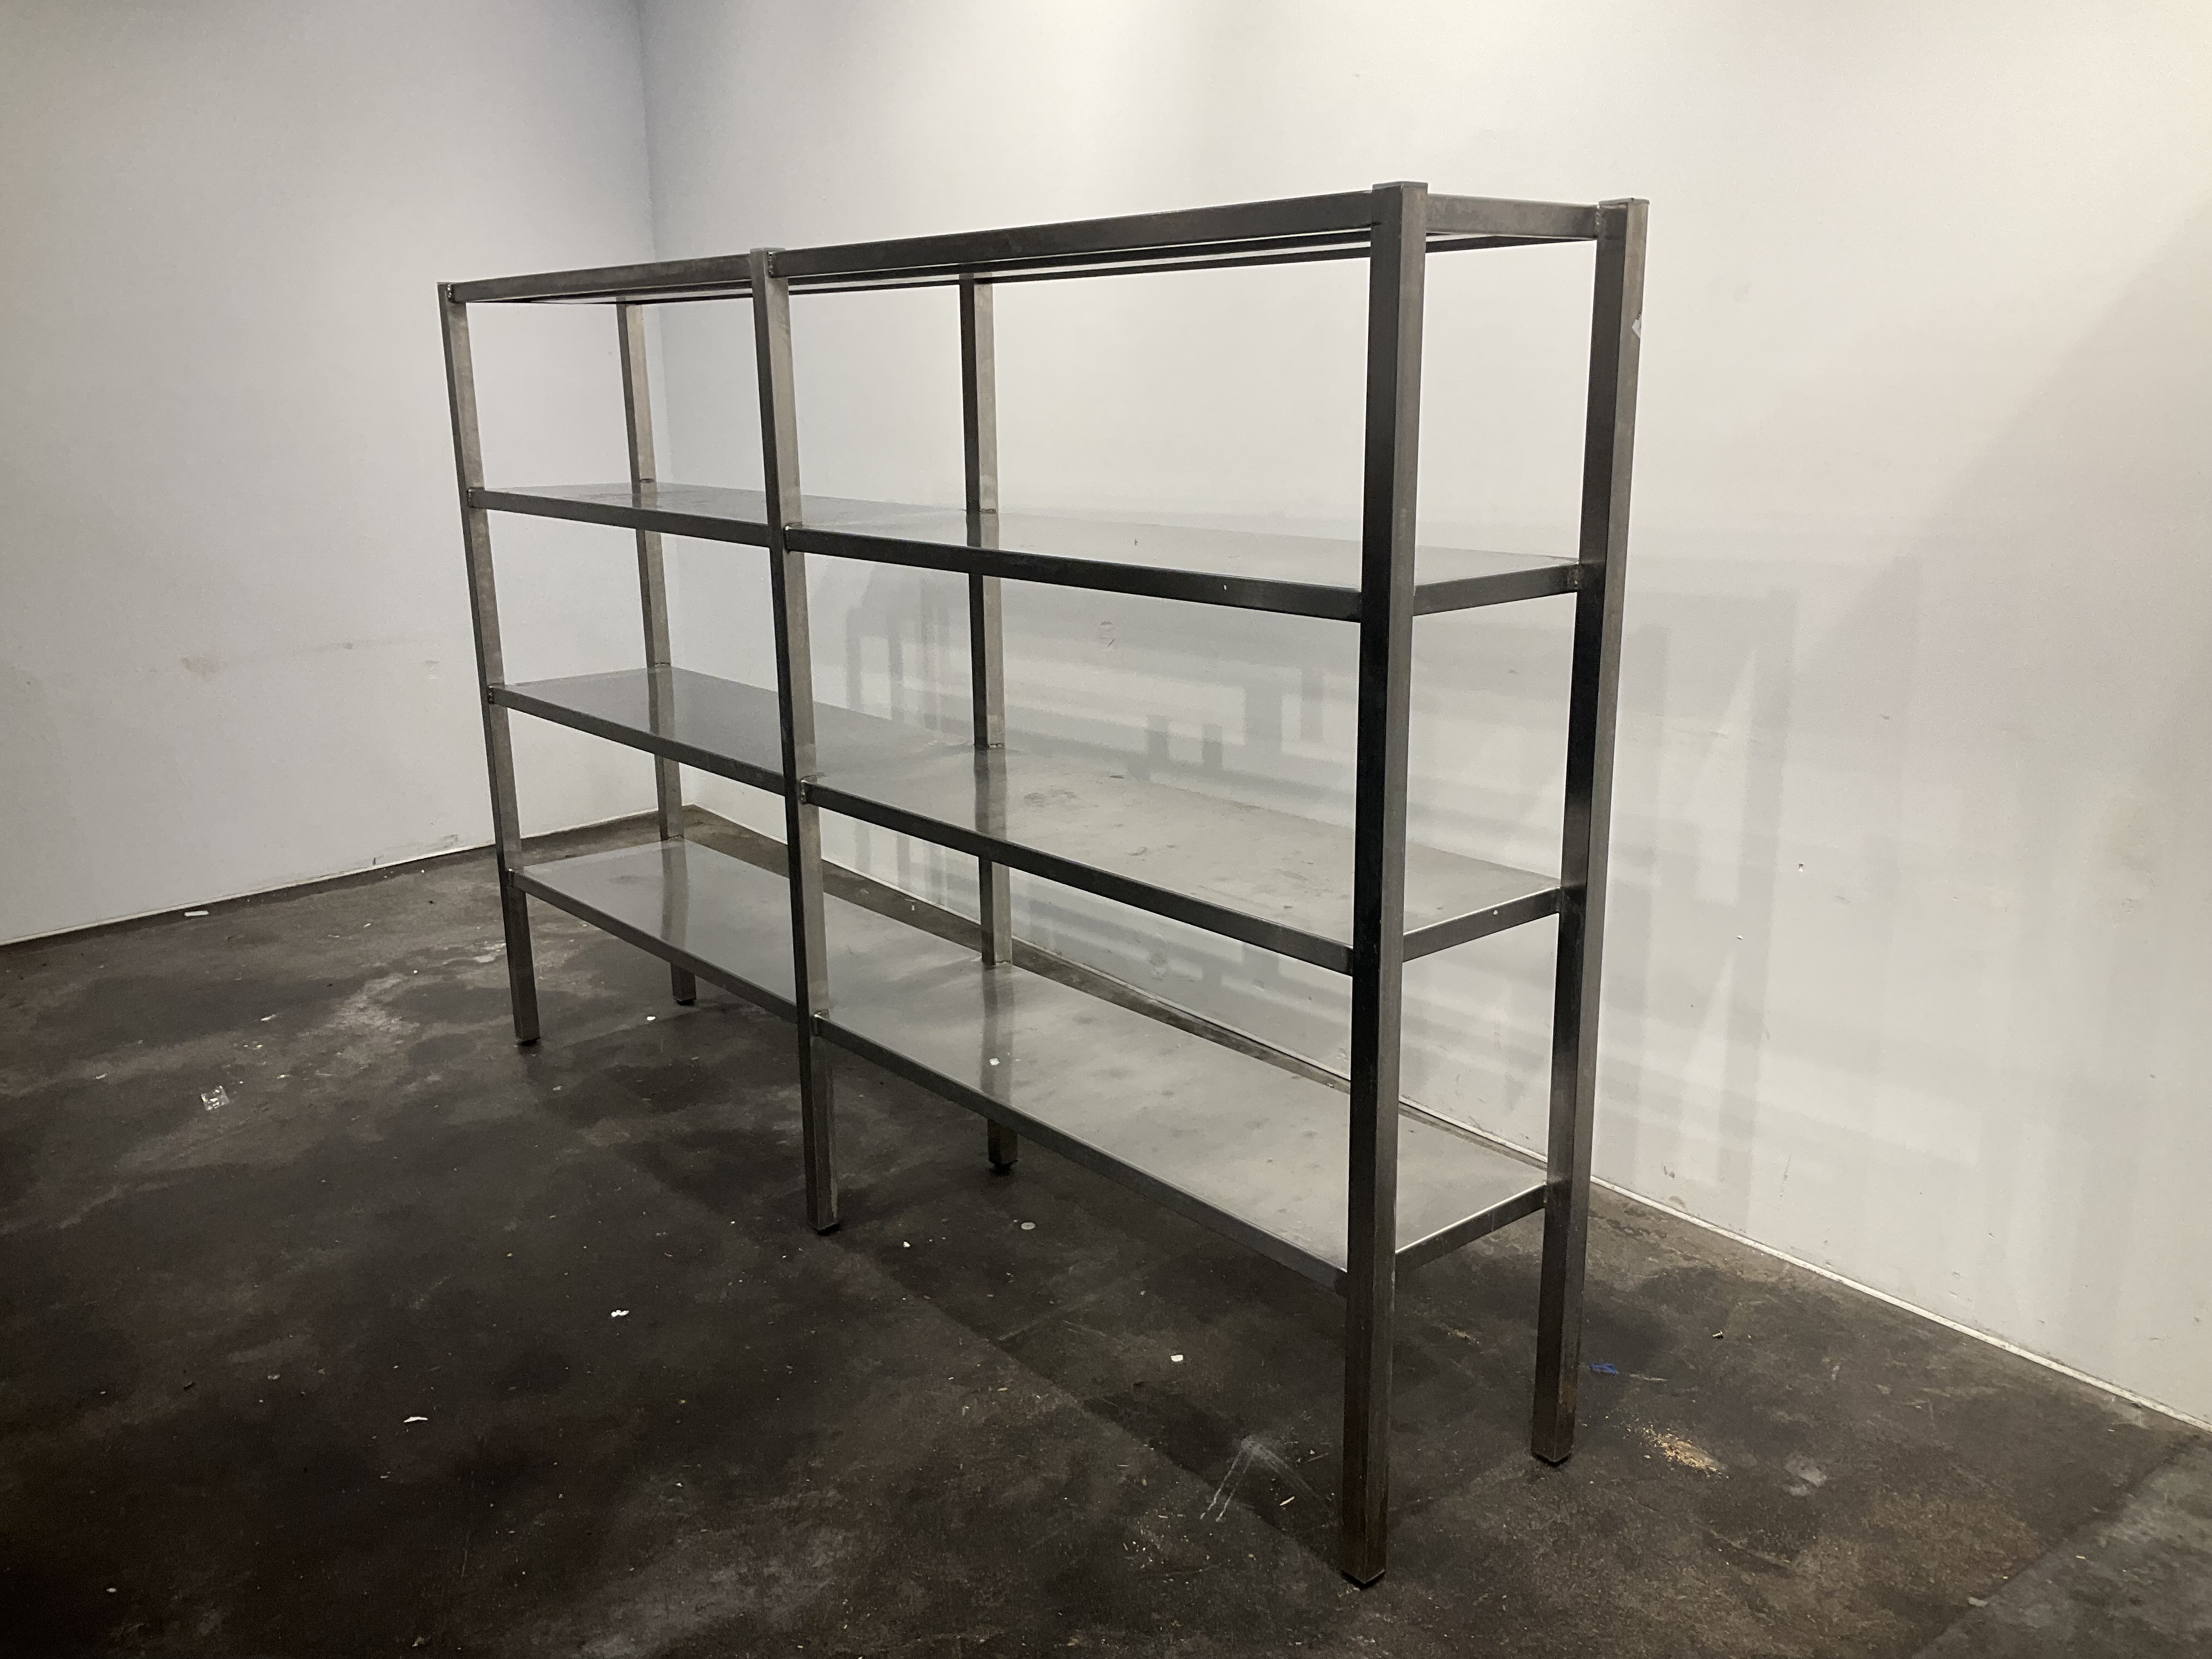 Stainless-steel shelf / shelf made of stainless steel, used